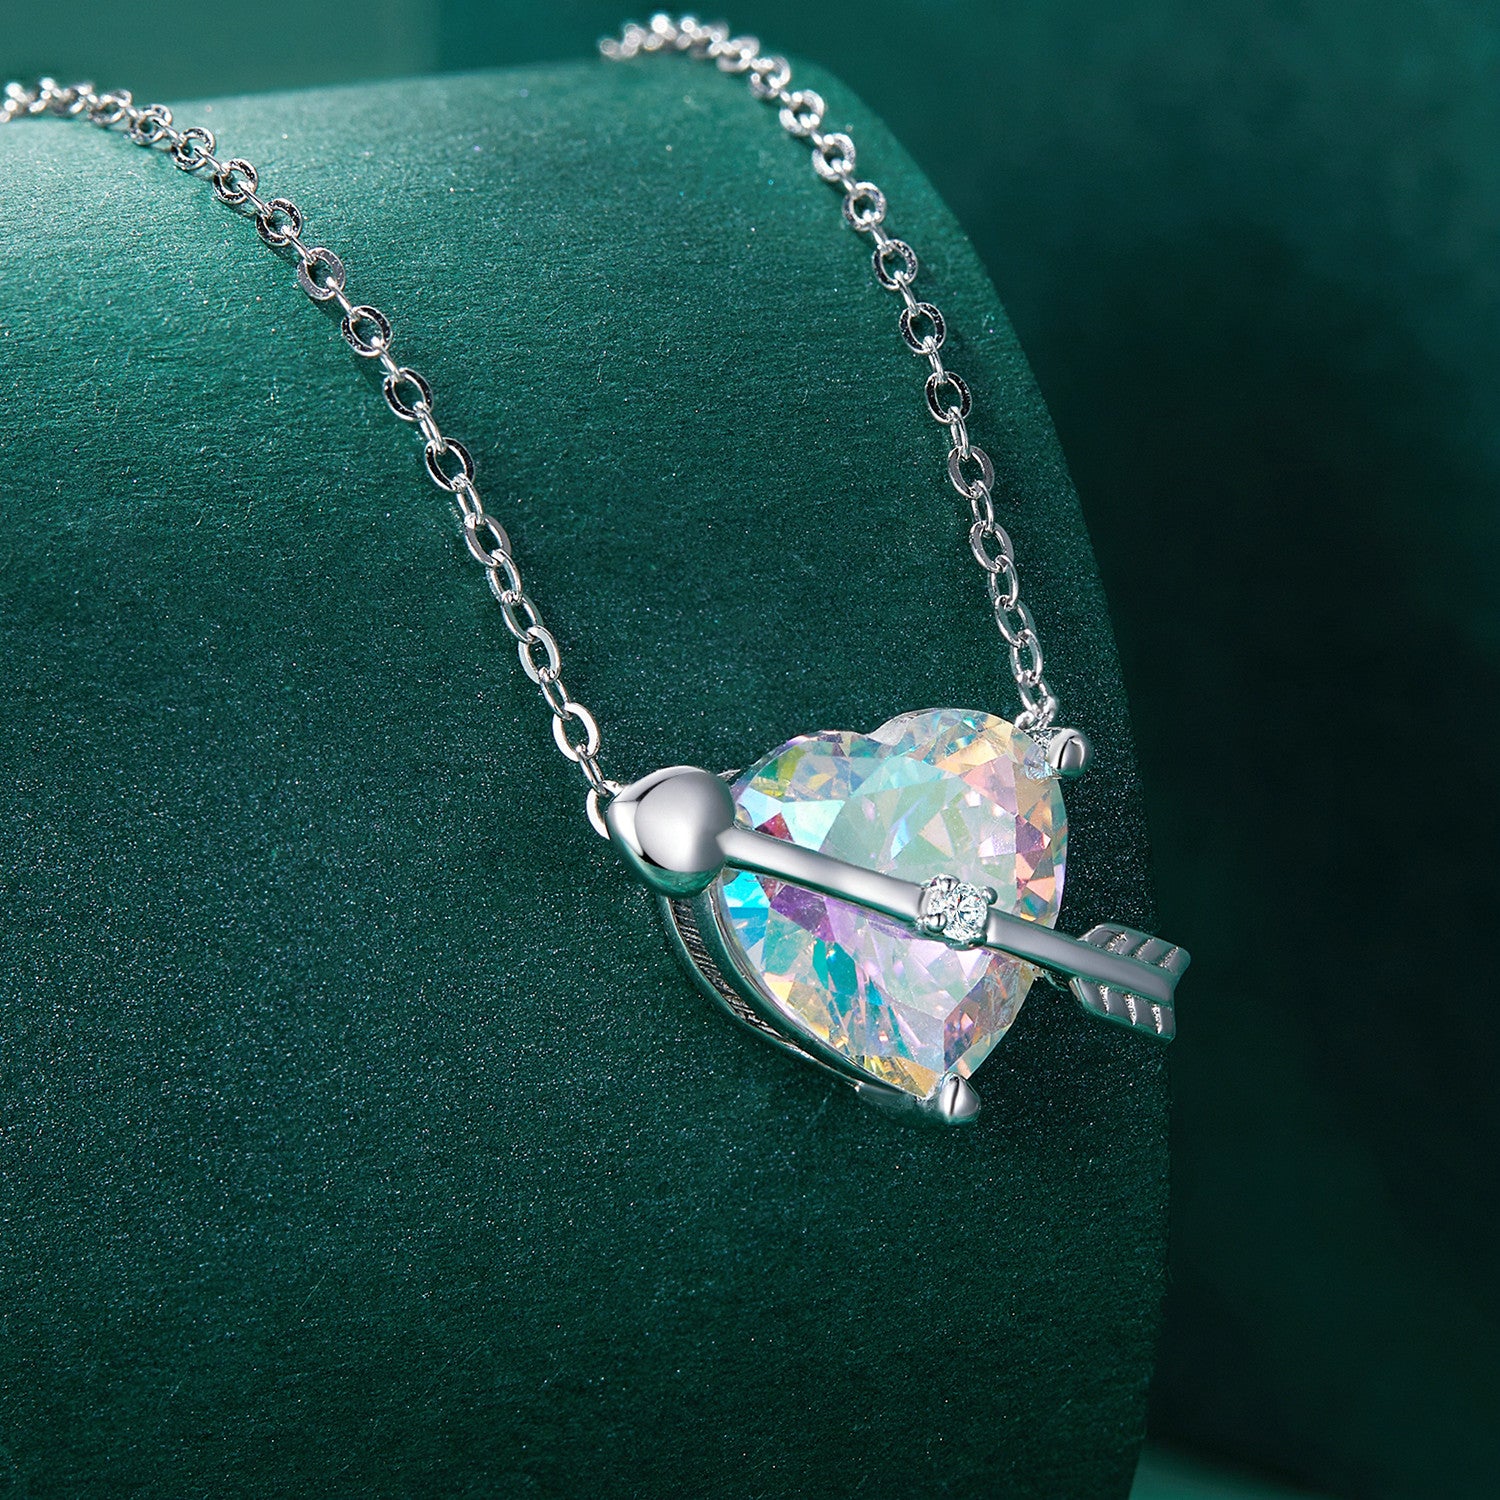 Cupid's Arrow of Love Pendant Necklace - Anthology Creations